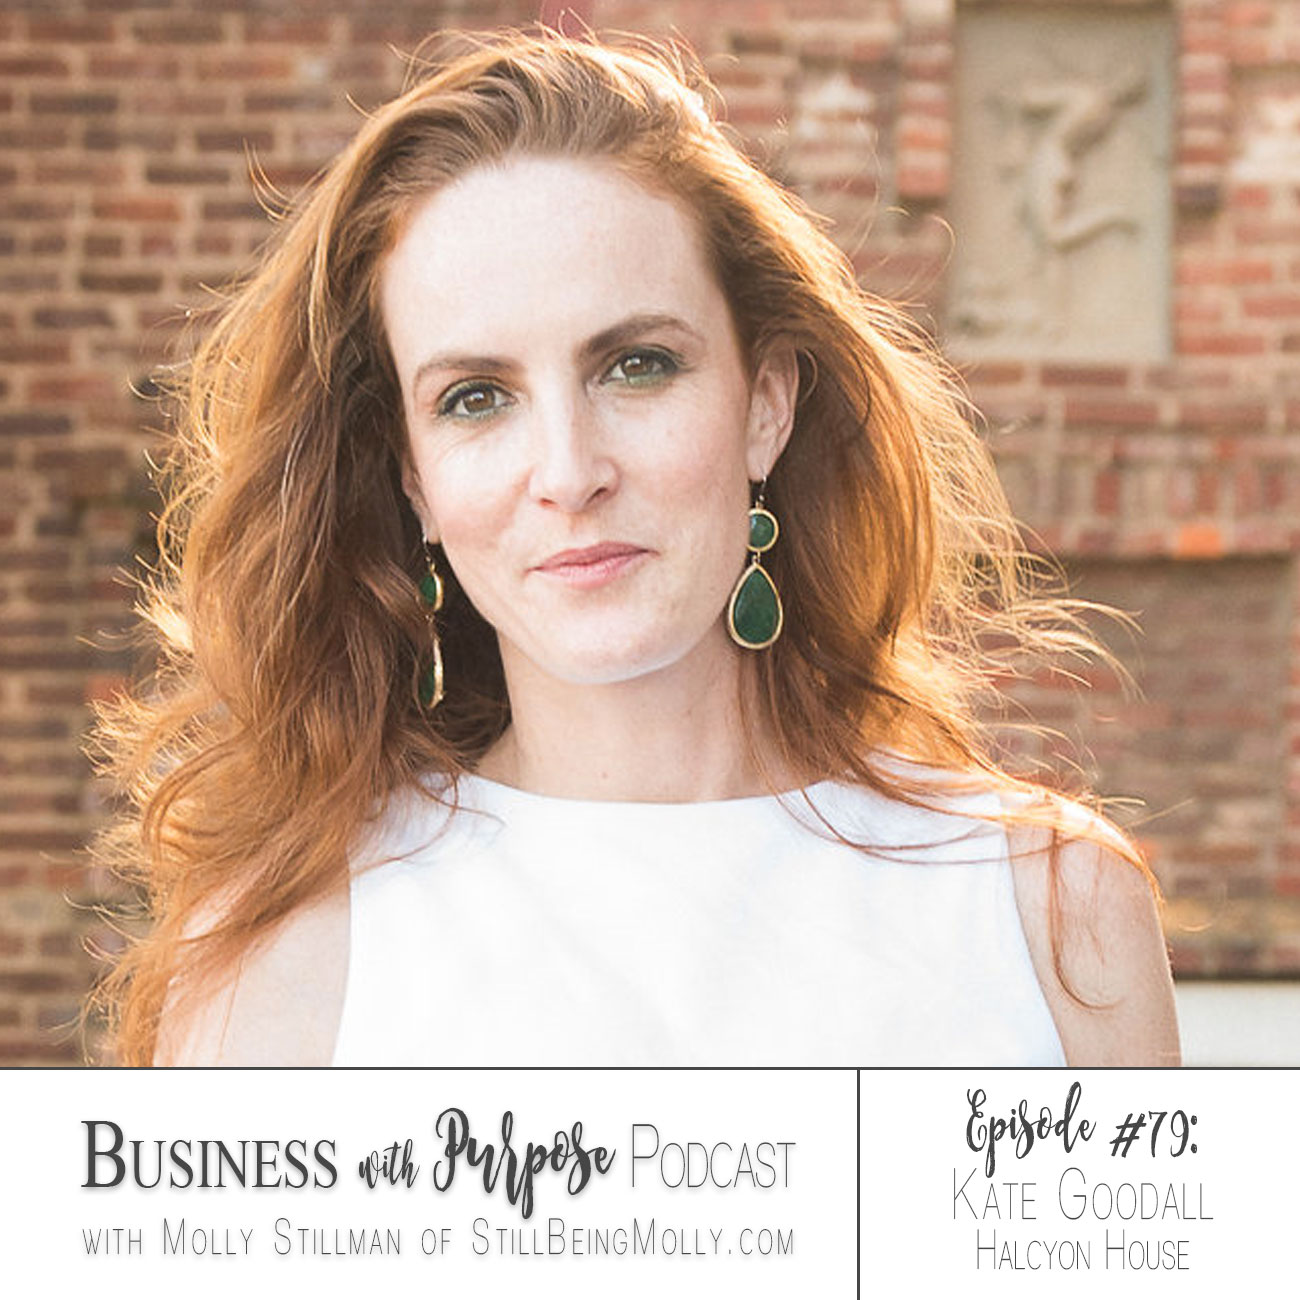 Business with Purpose Podcast EP 79: Kate Goodall, Co-Founder and CEO of Halcyon House by popular North Carolina ethical blogger and podcaster Still Being Molly